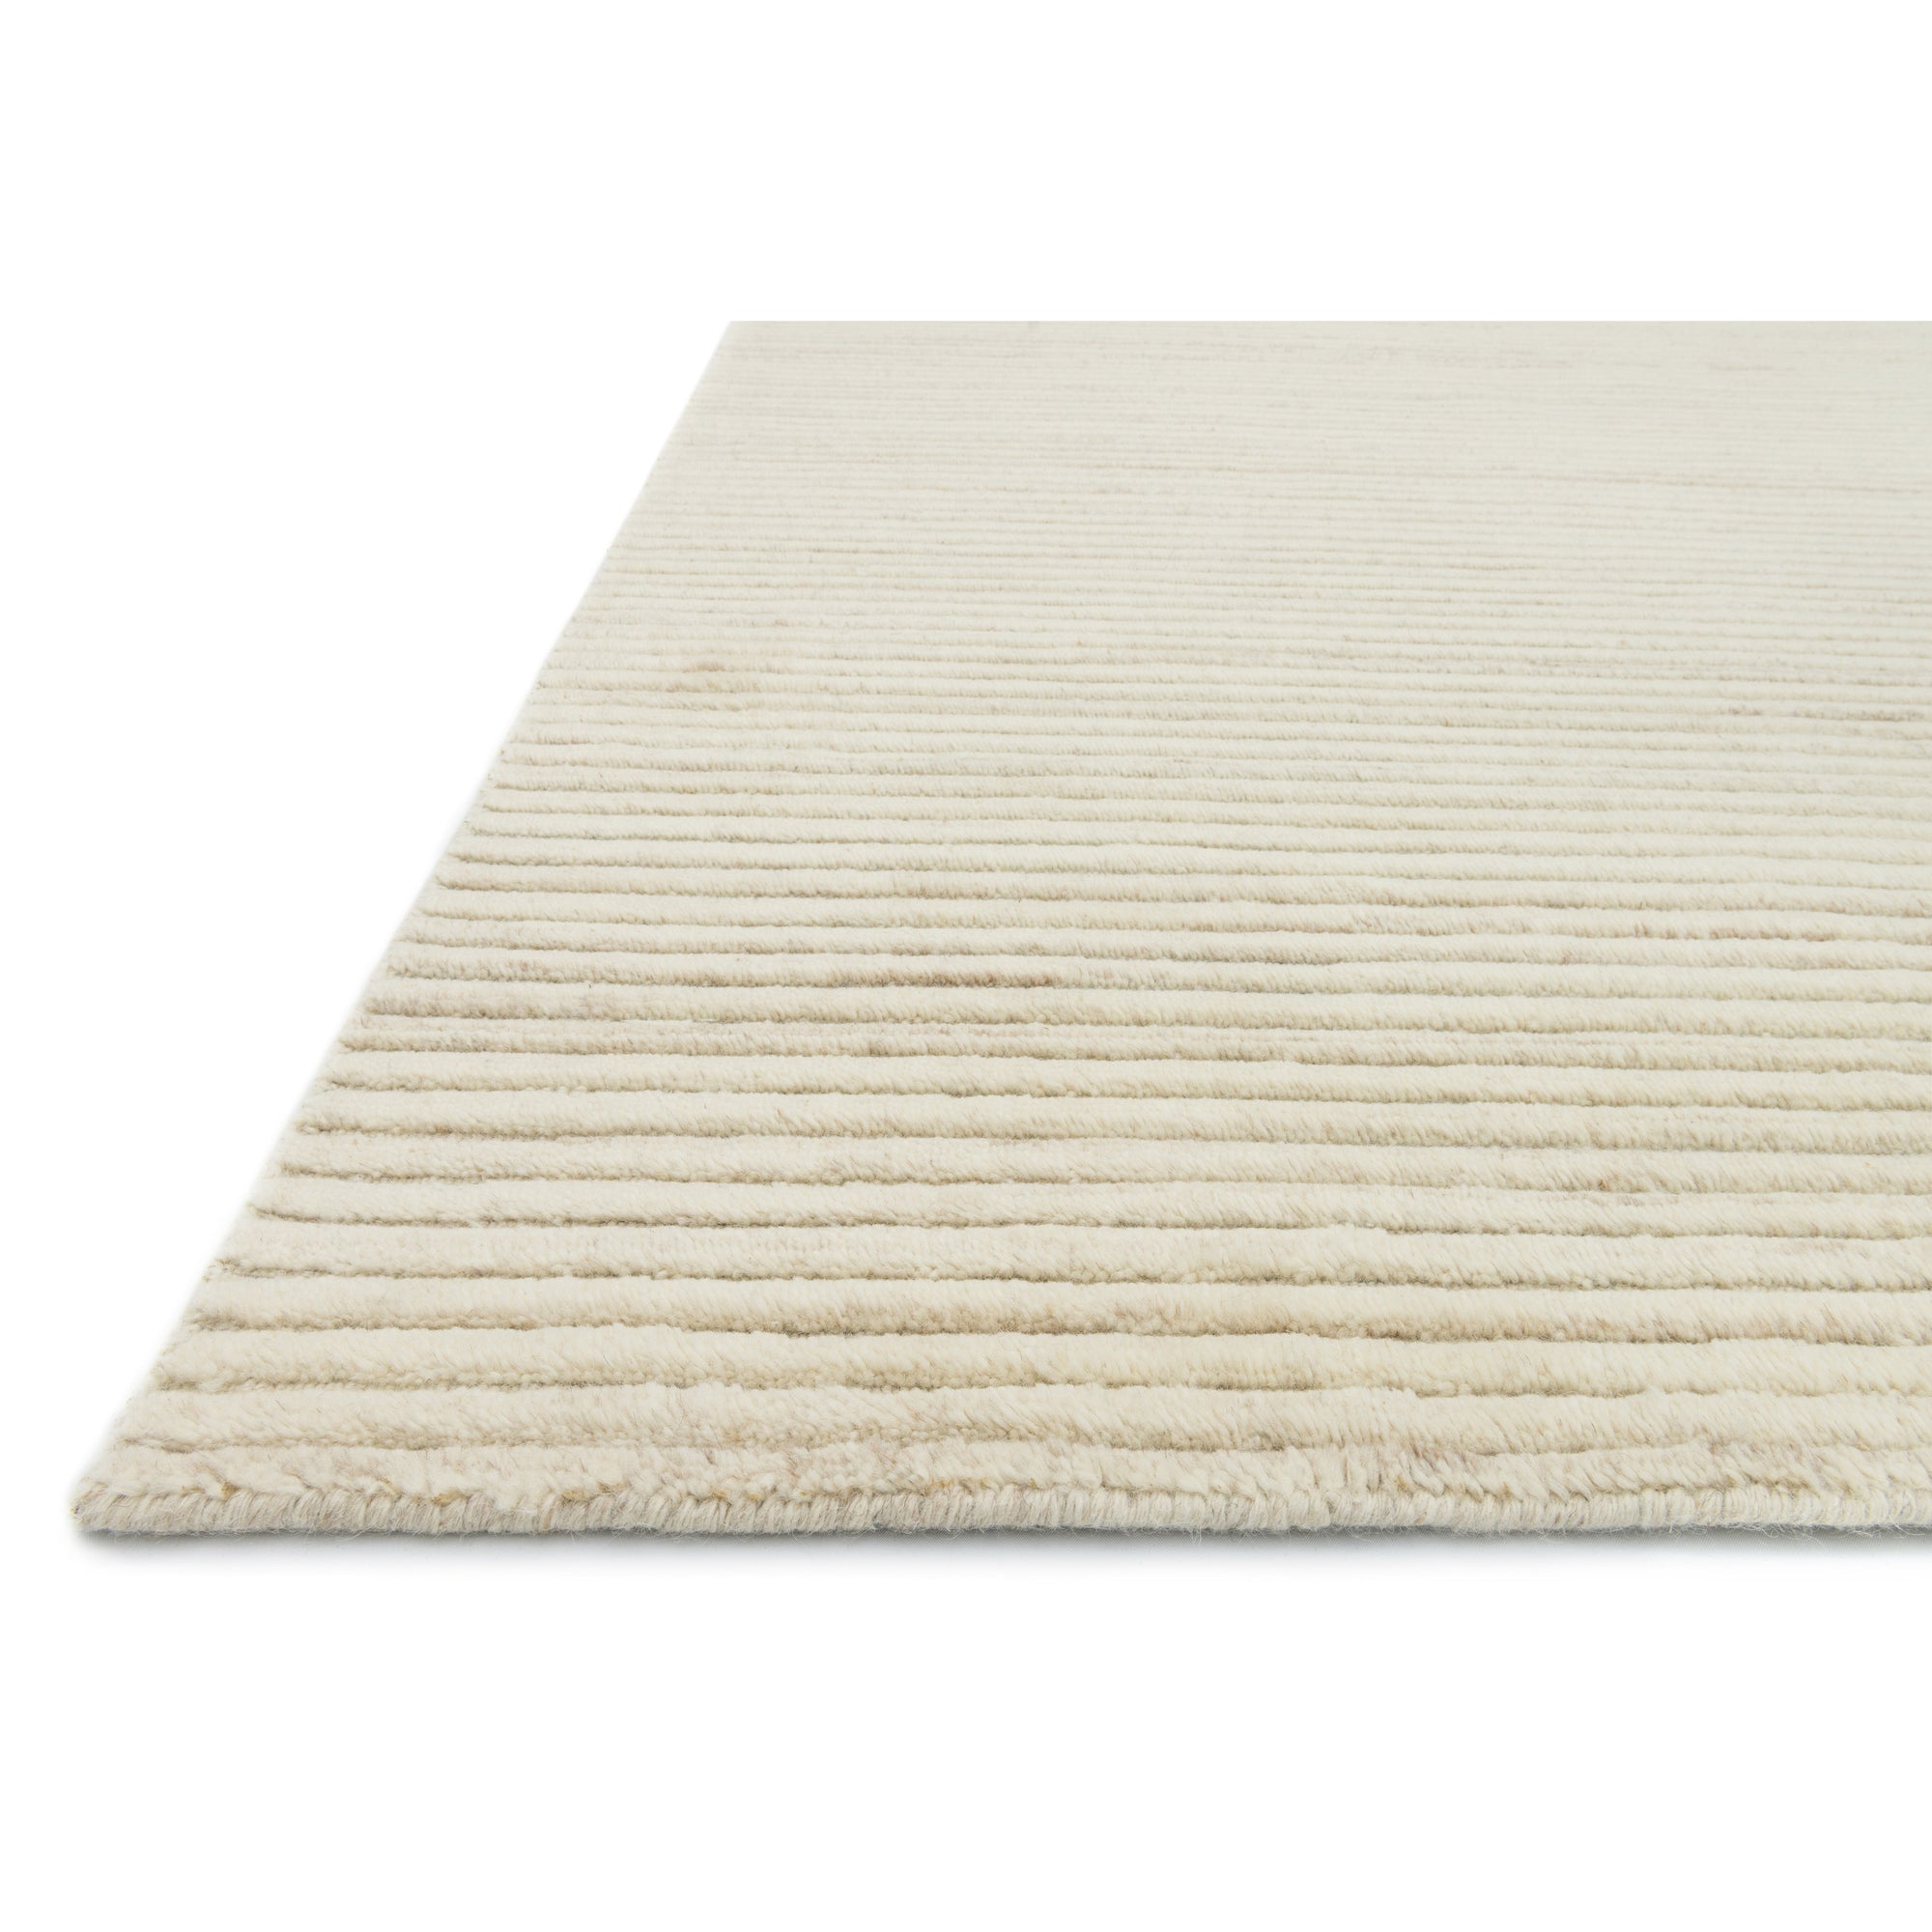 Rugs by Roo Loloi Hadley Ivory Area Rug in size 3' 6" x 5' 6"